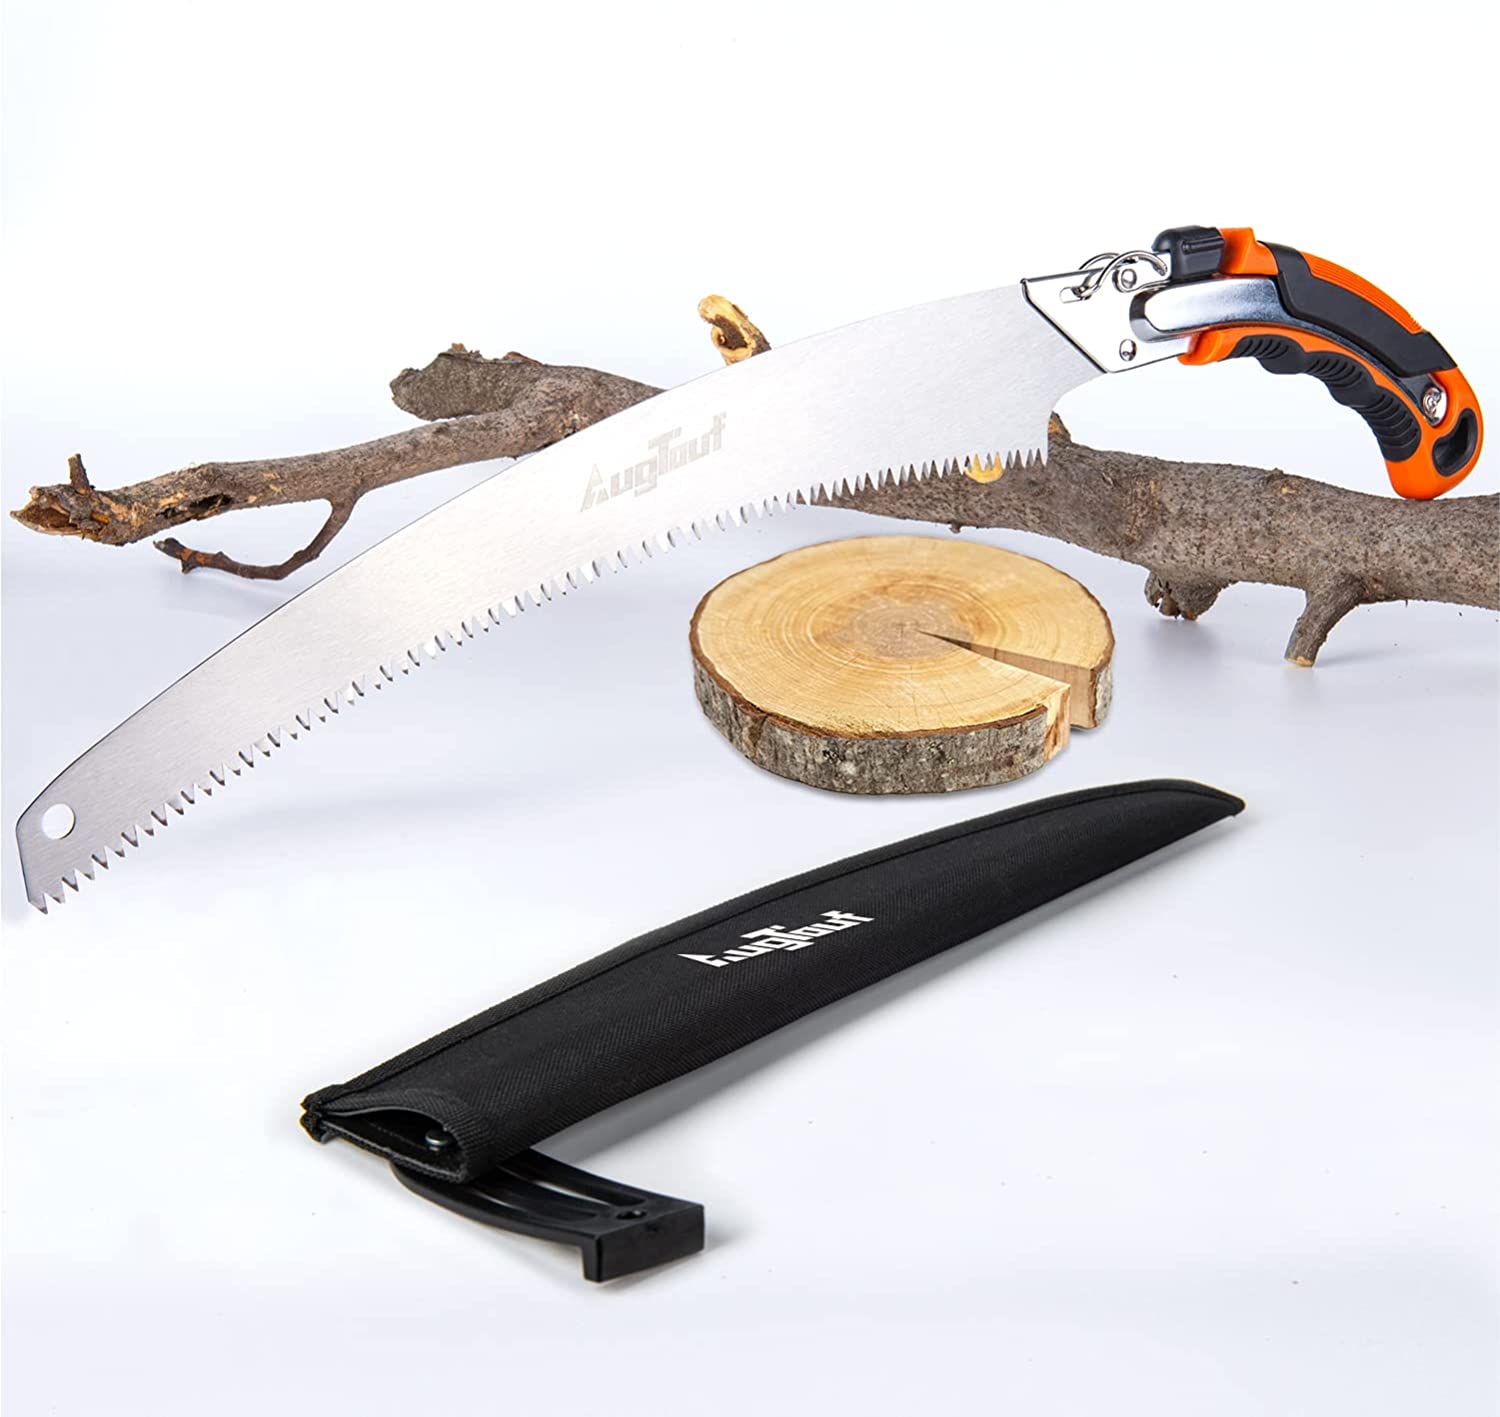 AugTouf Razor Tooth Pruning Saw with Sheath, 14 Inch Curved Blade for Wood Camping, Dry Wood Pruning